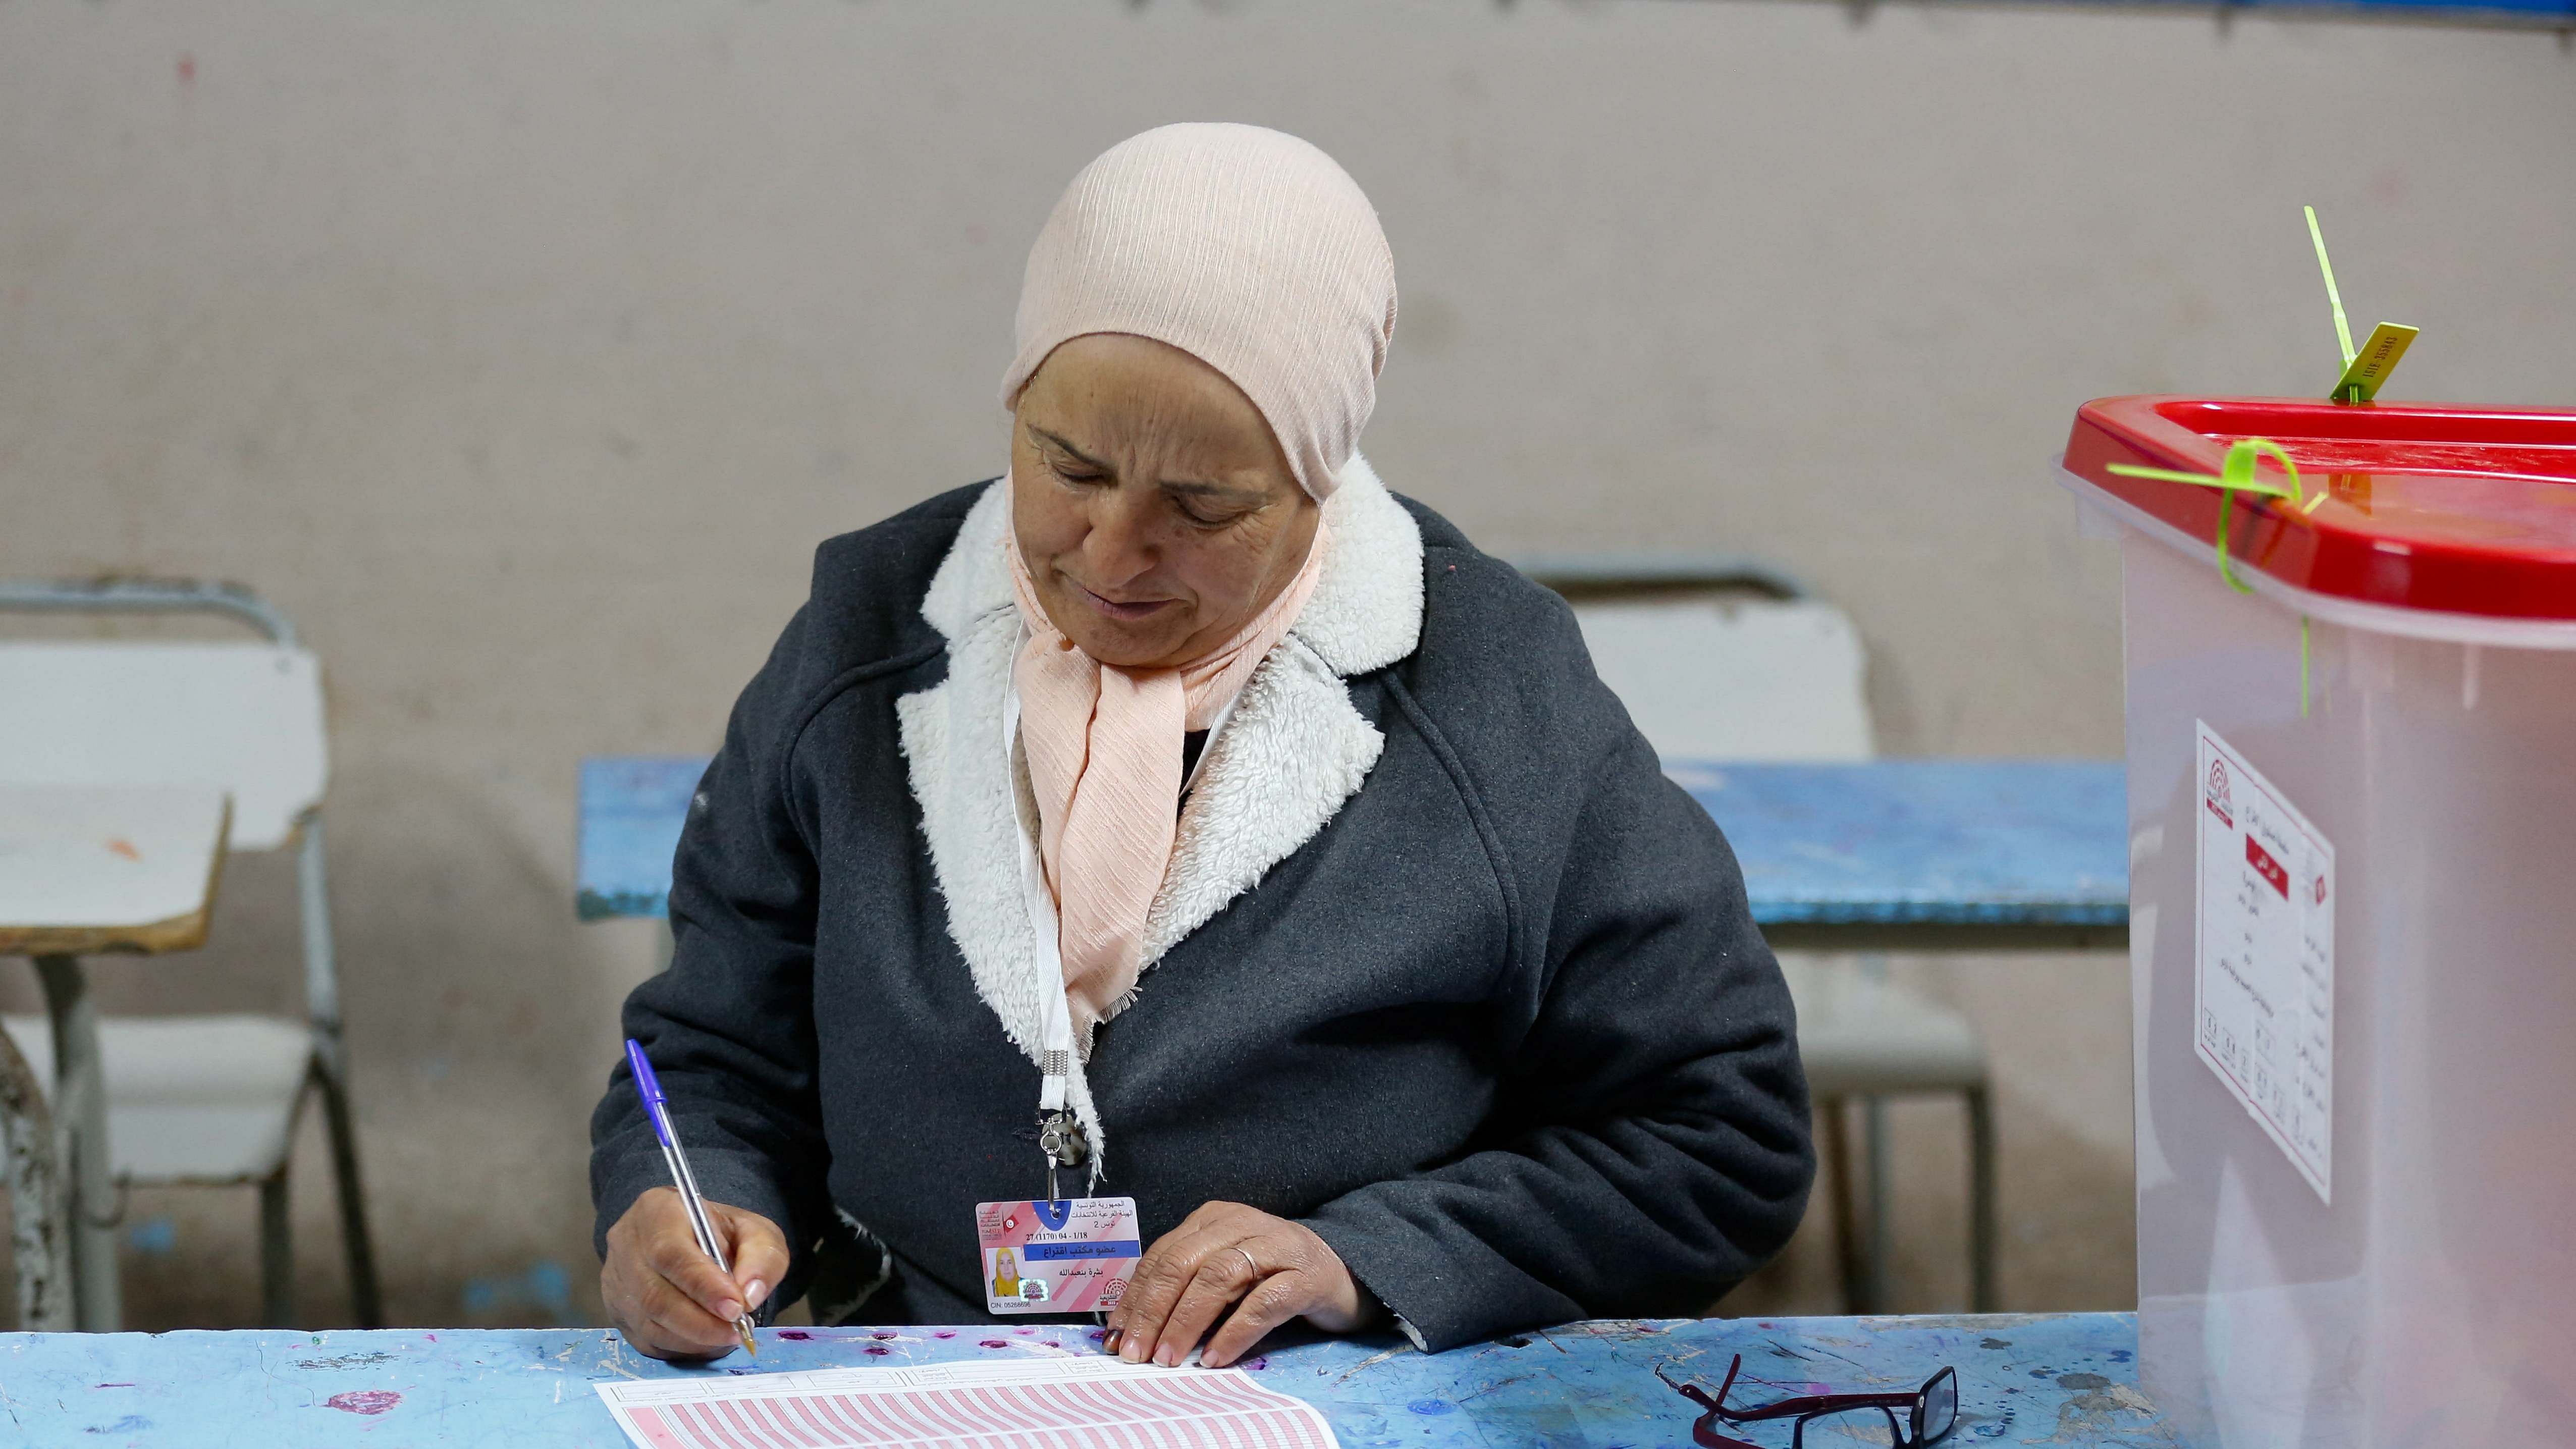 A member of the election committee works next to a closed ballot box at a polling station during the second round of the parliamentary election in Tunis, Tunisia January 29. Credit: Reuters Photo